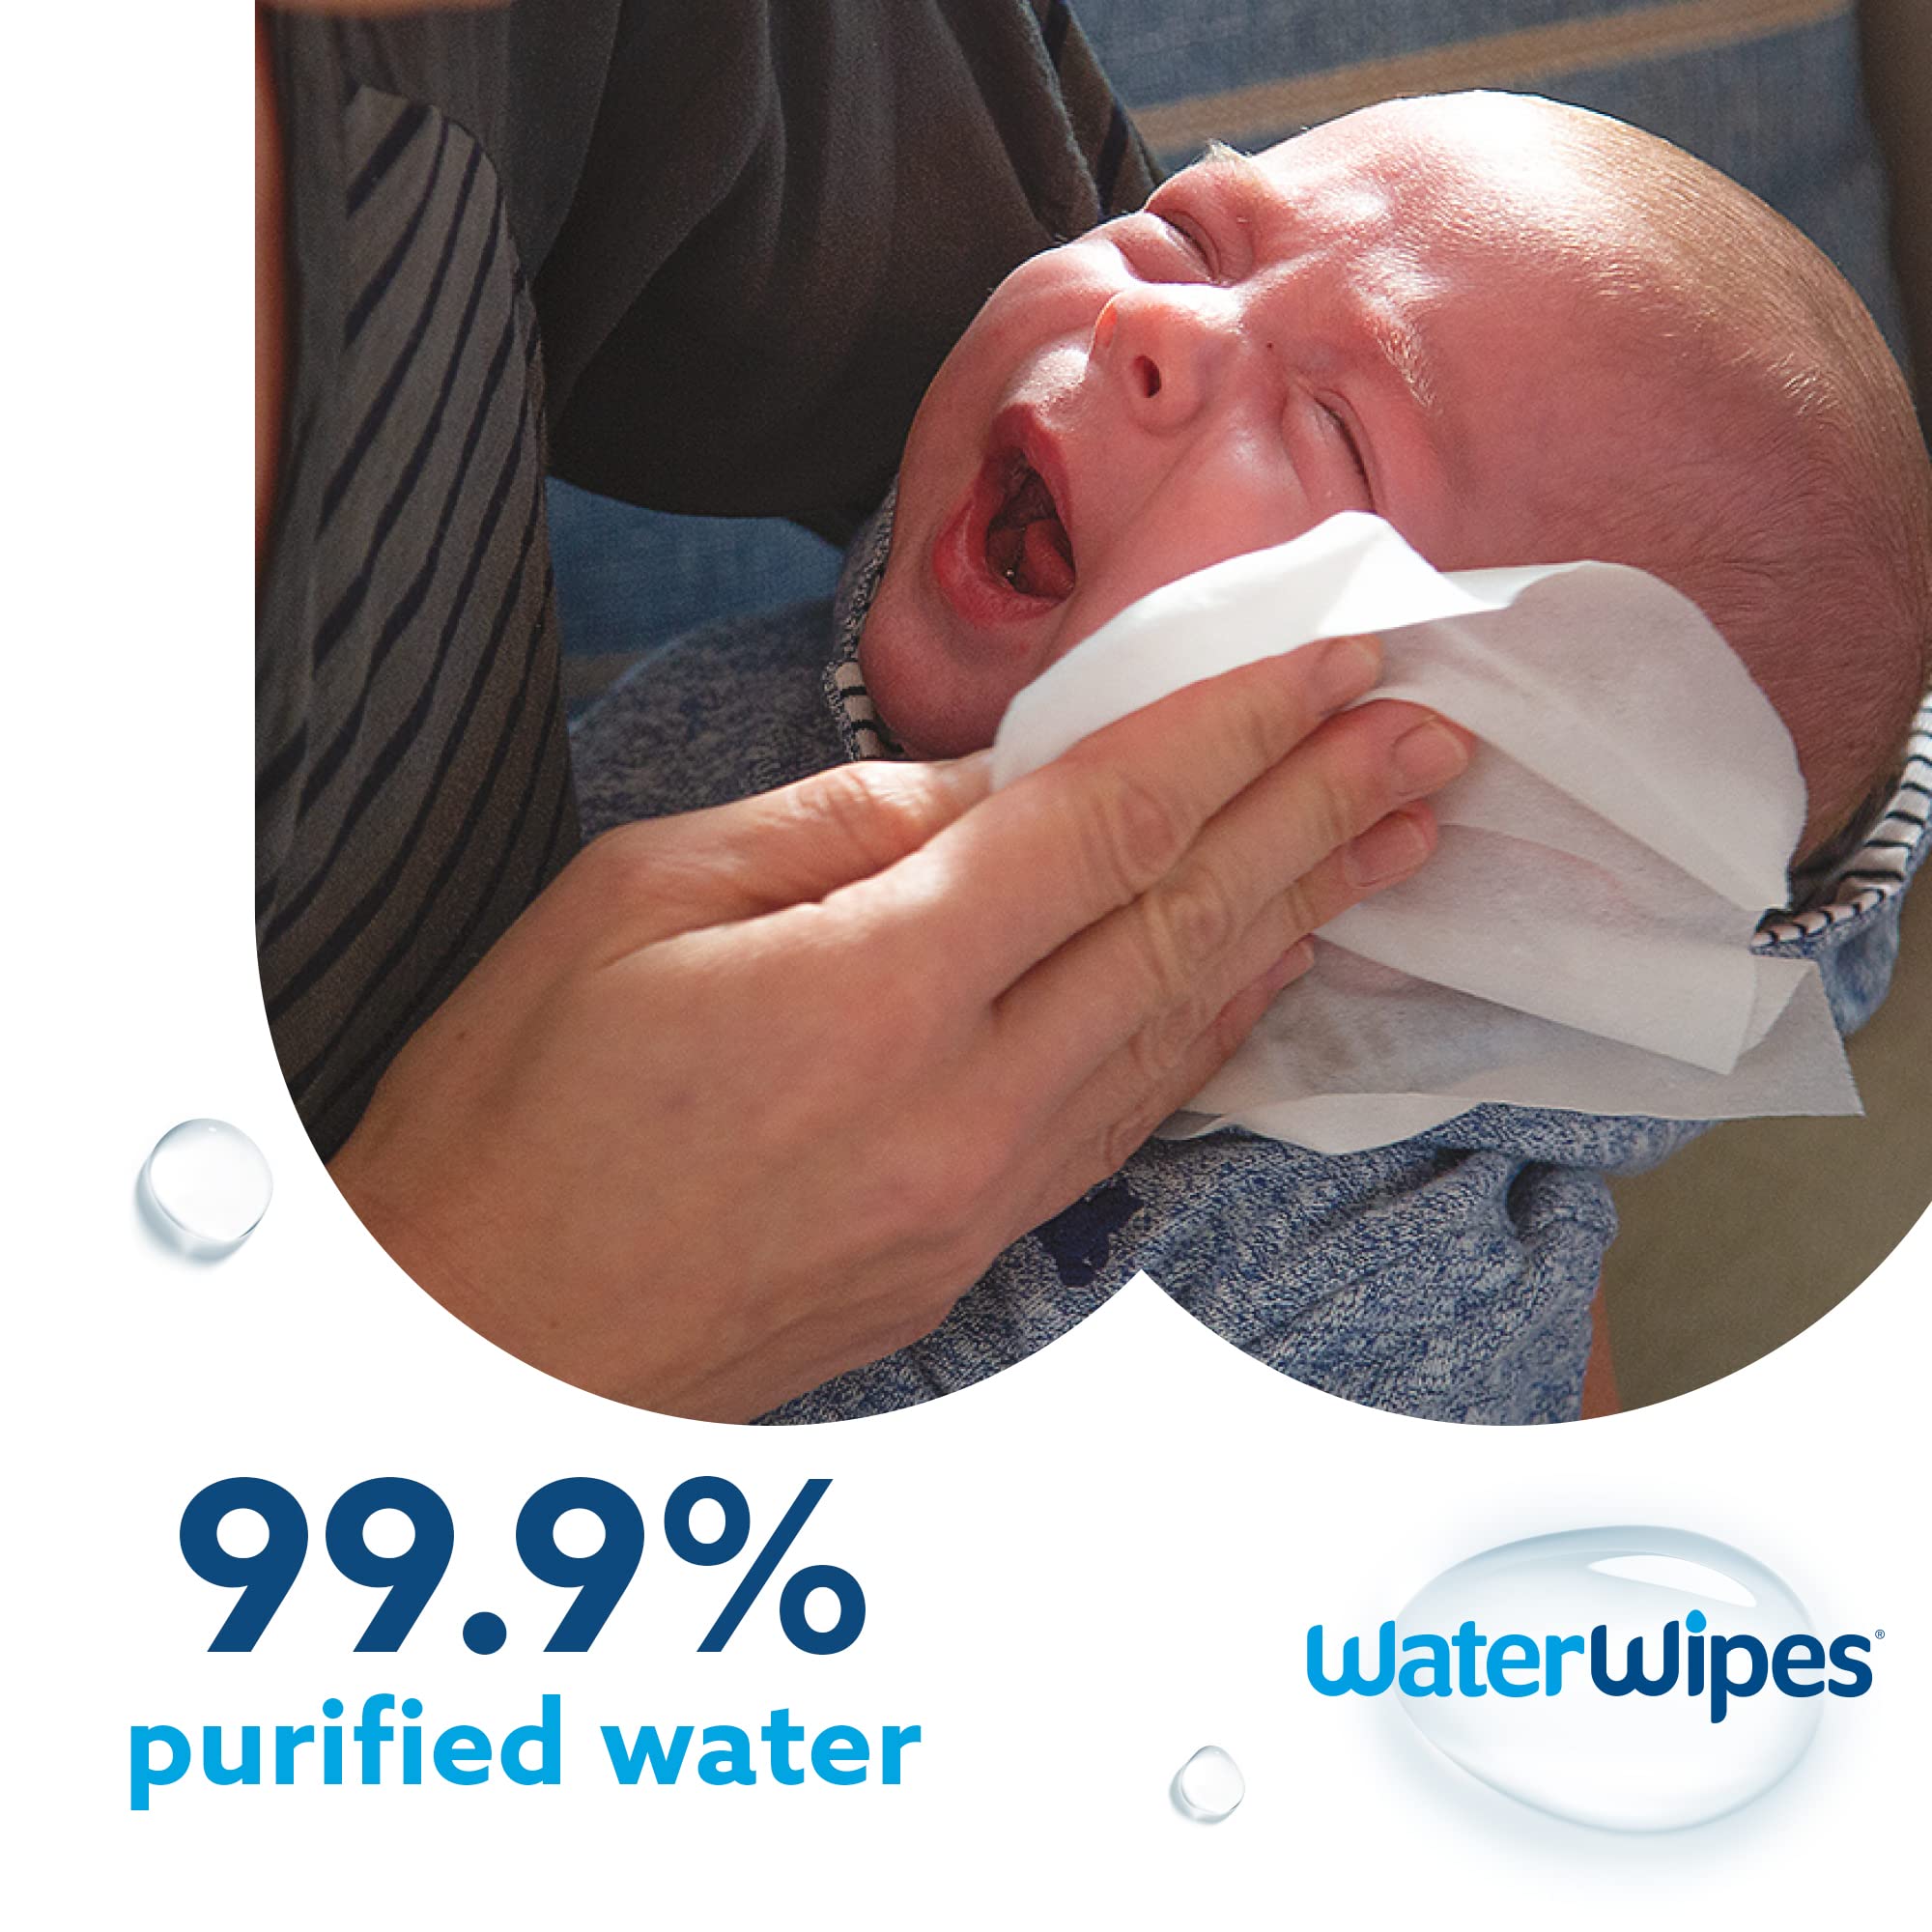 WaterWipes Plastic-Free Original Baby Wipes, 99.9% Water Based Wipes, Unscented & Hypoallergenic for Sensitive Skin, 300 Count (5 packs), Packaging May Vary